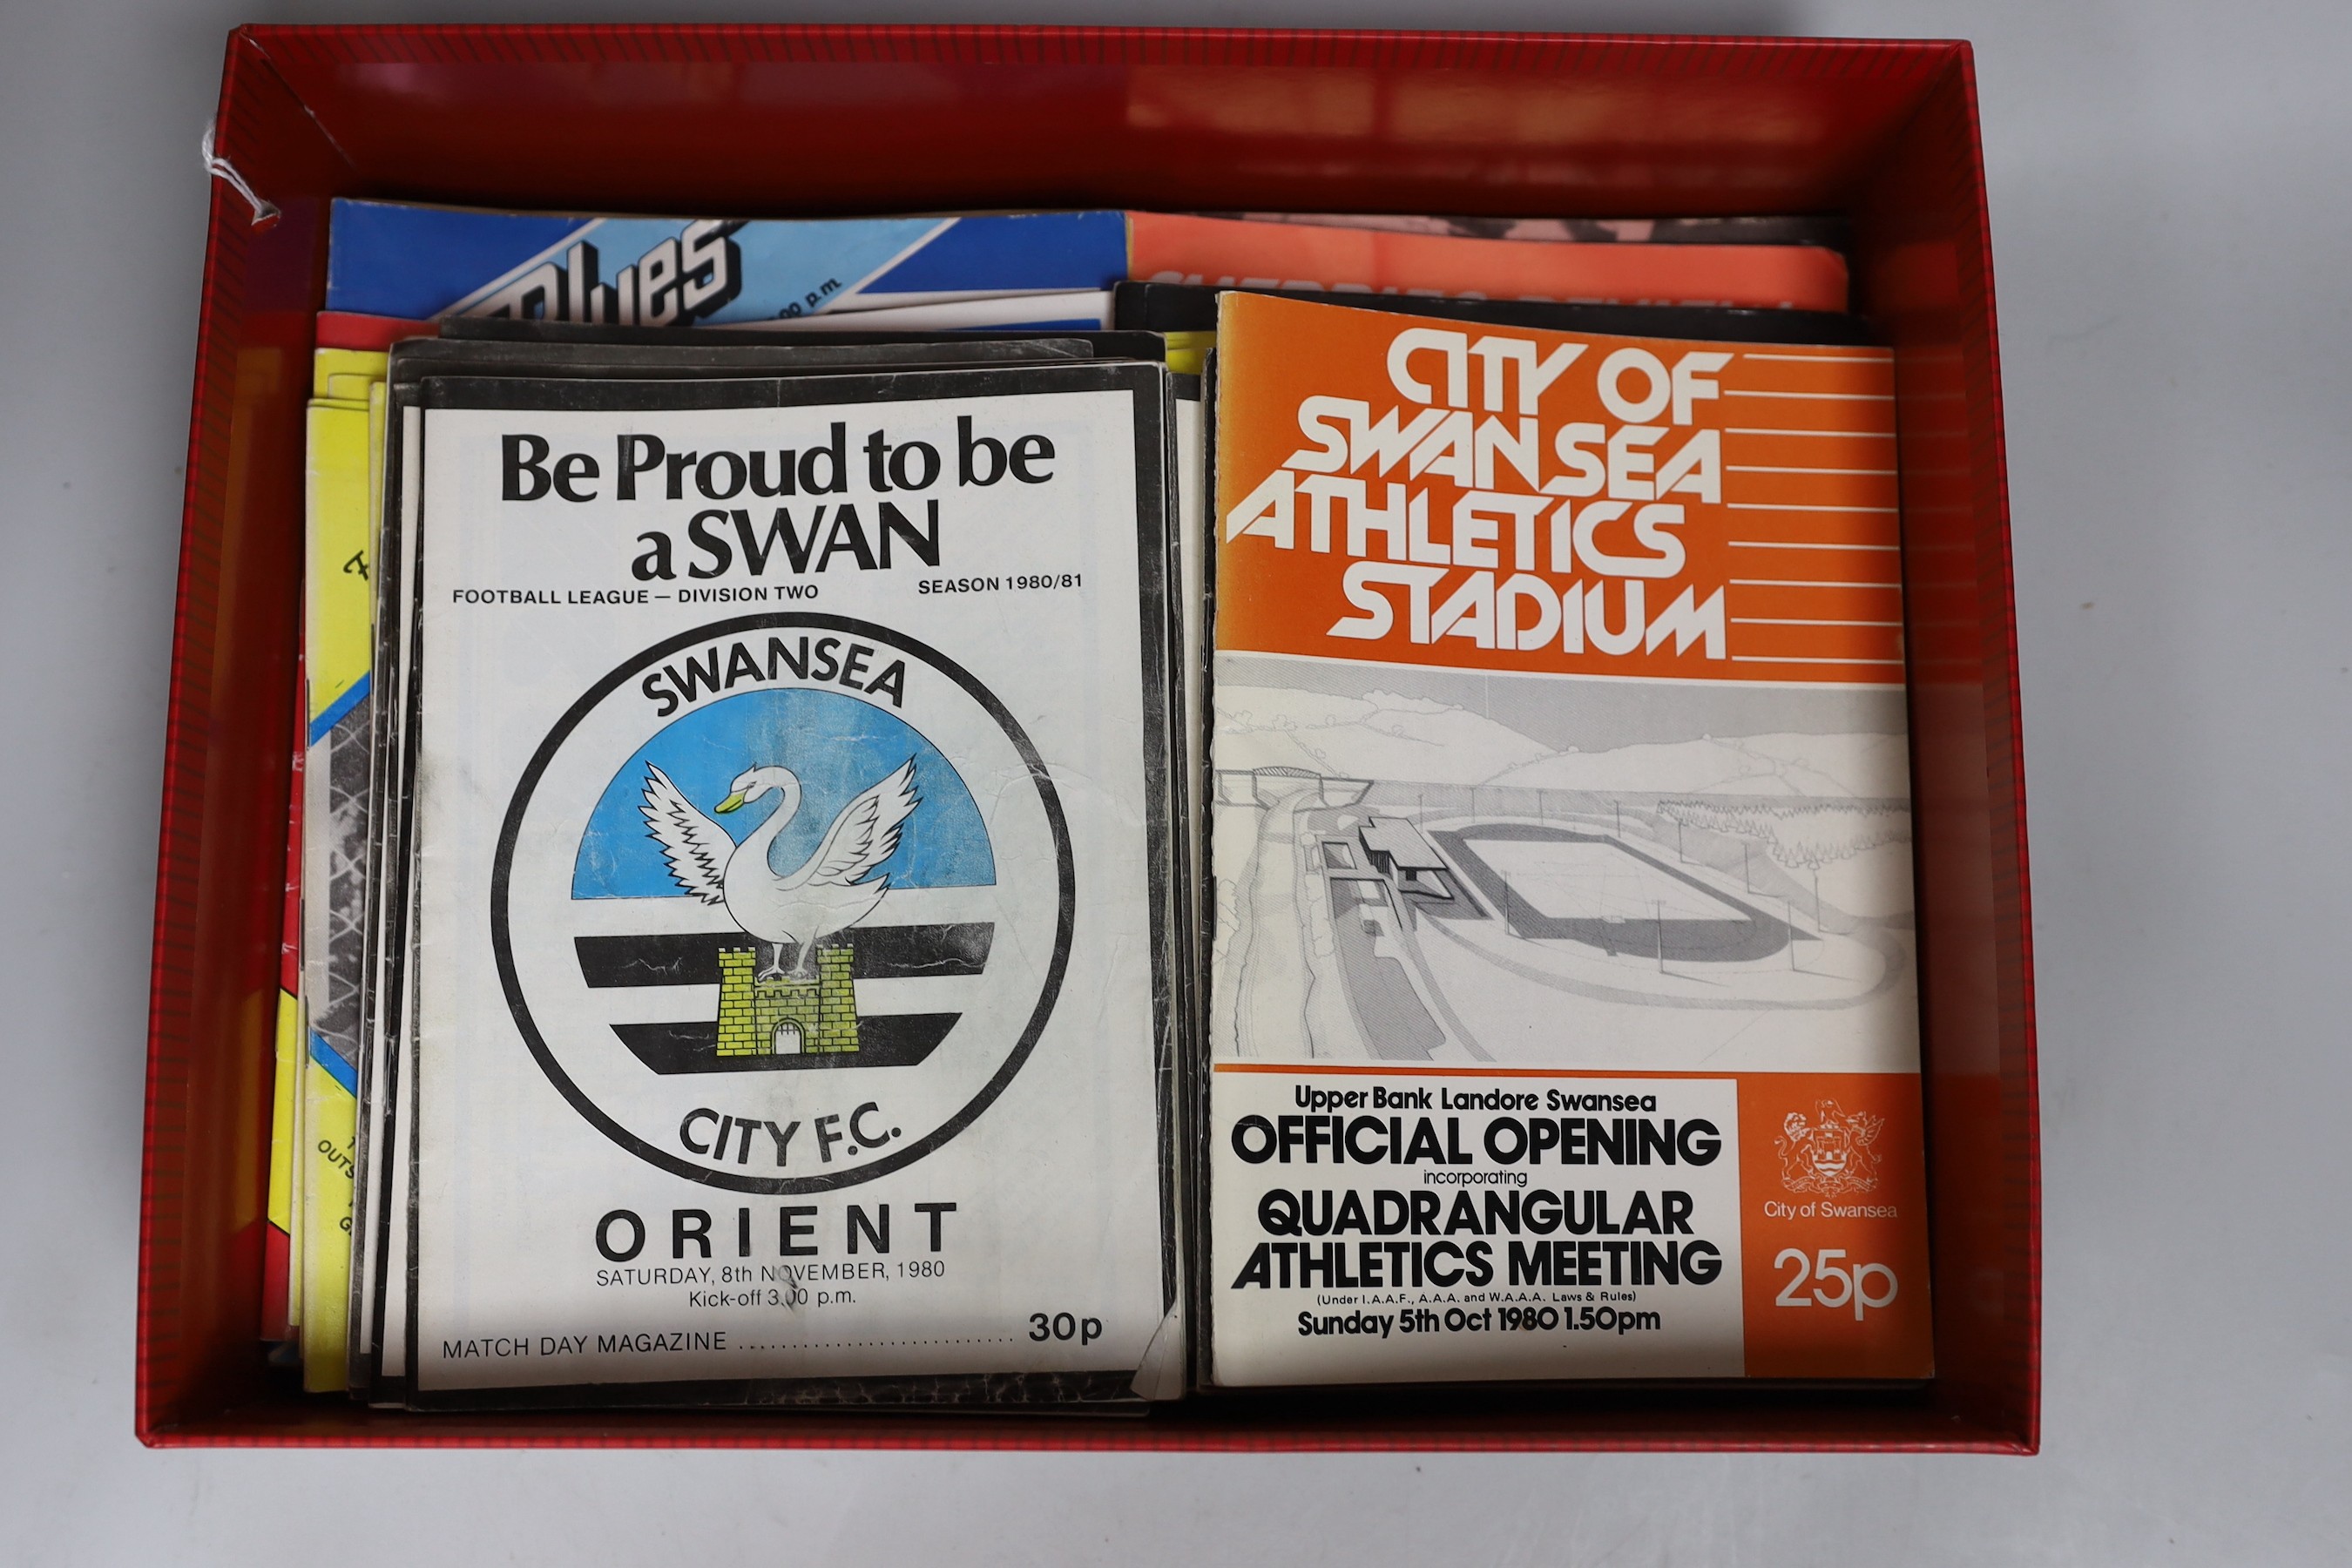 The Athletic News Football Annual 1892 and a quantity of 1980’s Swansea City football programmes.